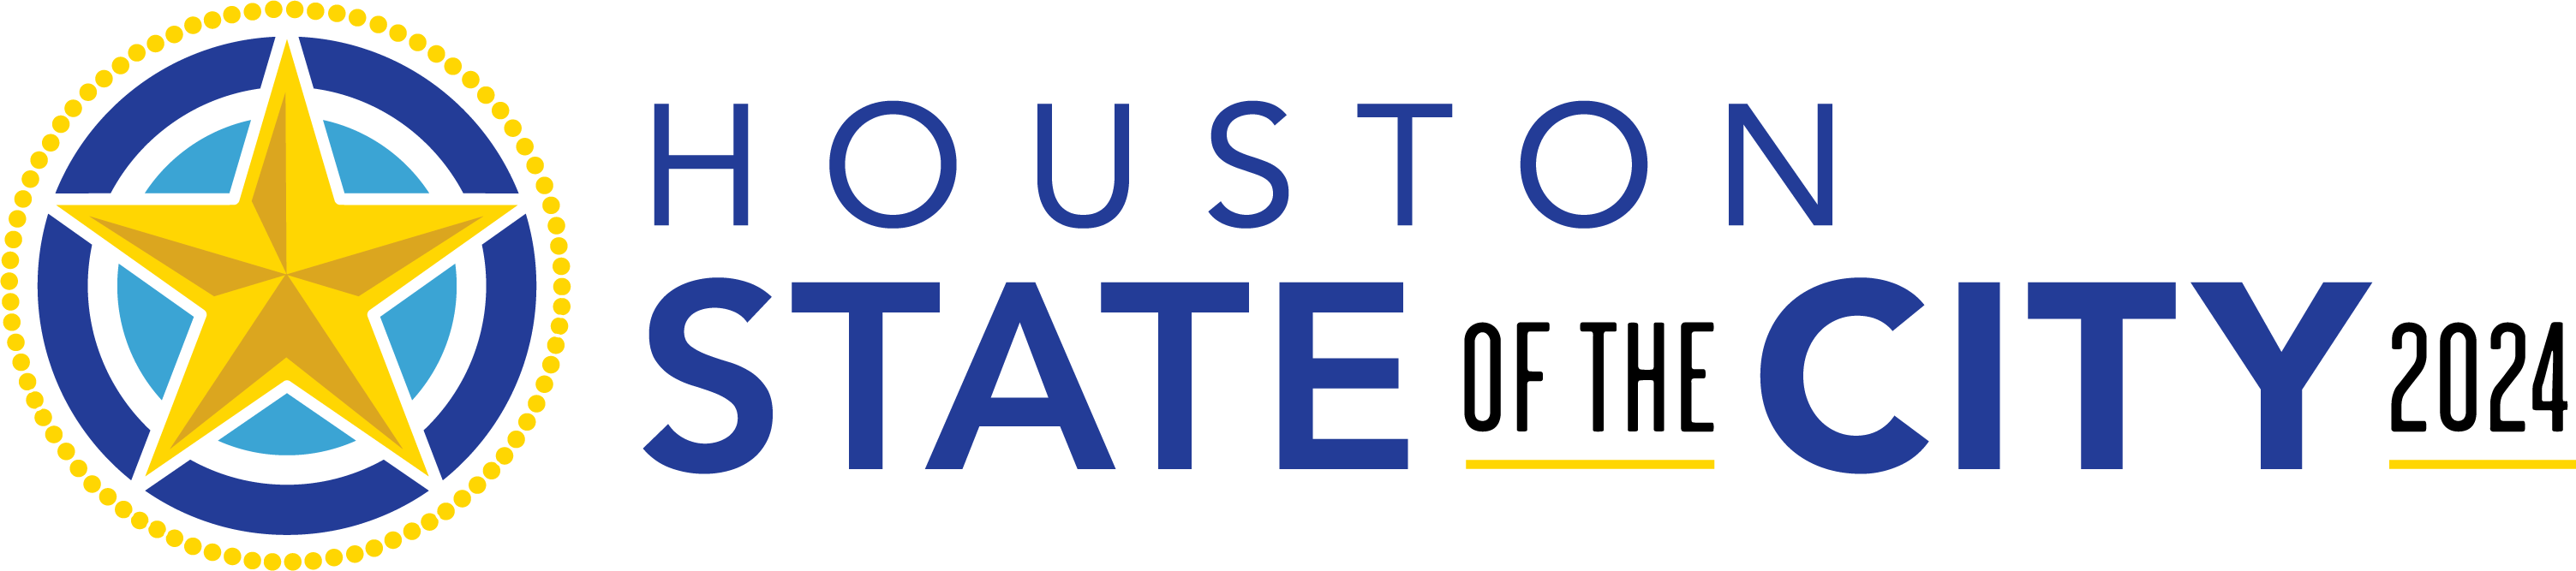 11Houston State of the City 2024